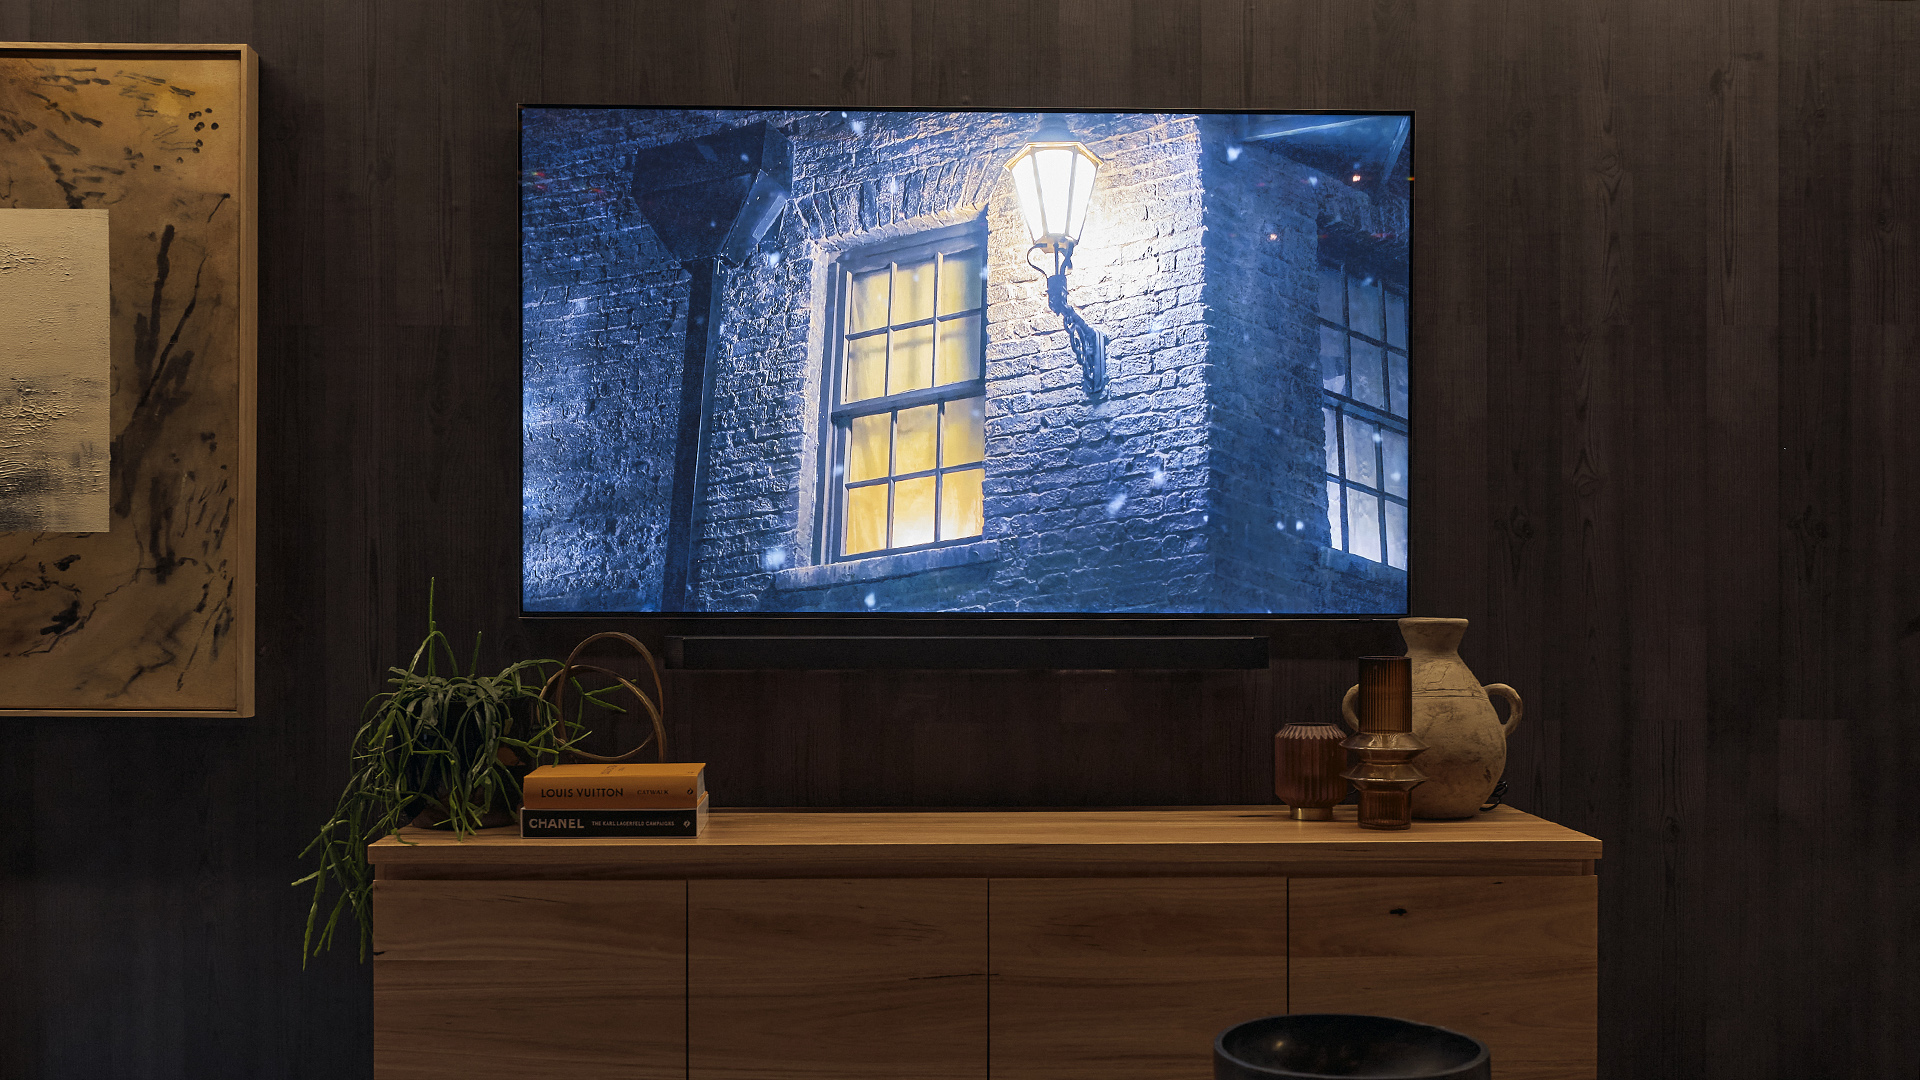 Samsung's 2022 TV lineup arrives in Australia, includes a stunning matte display